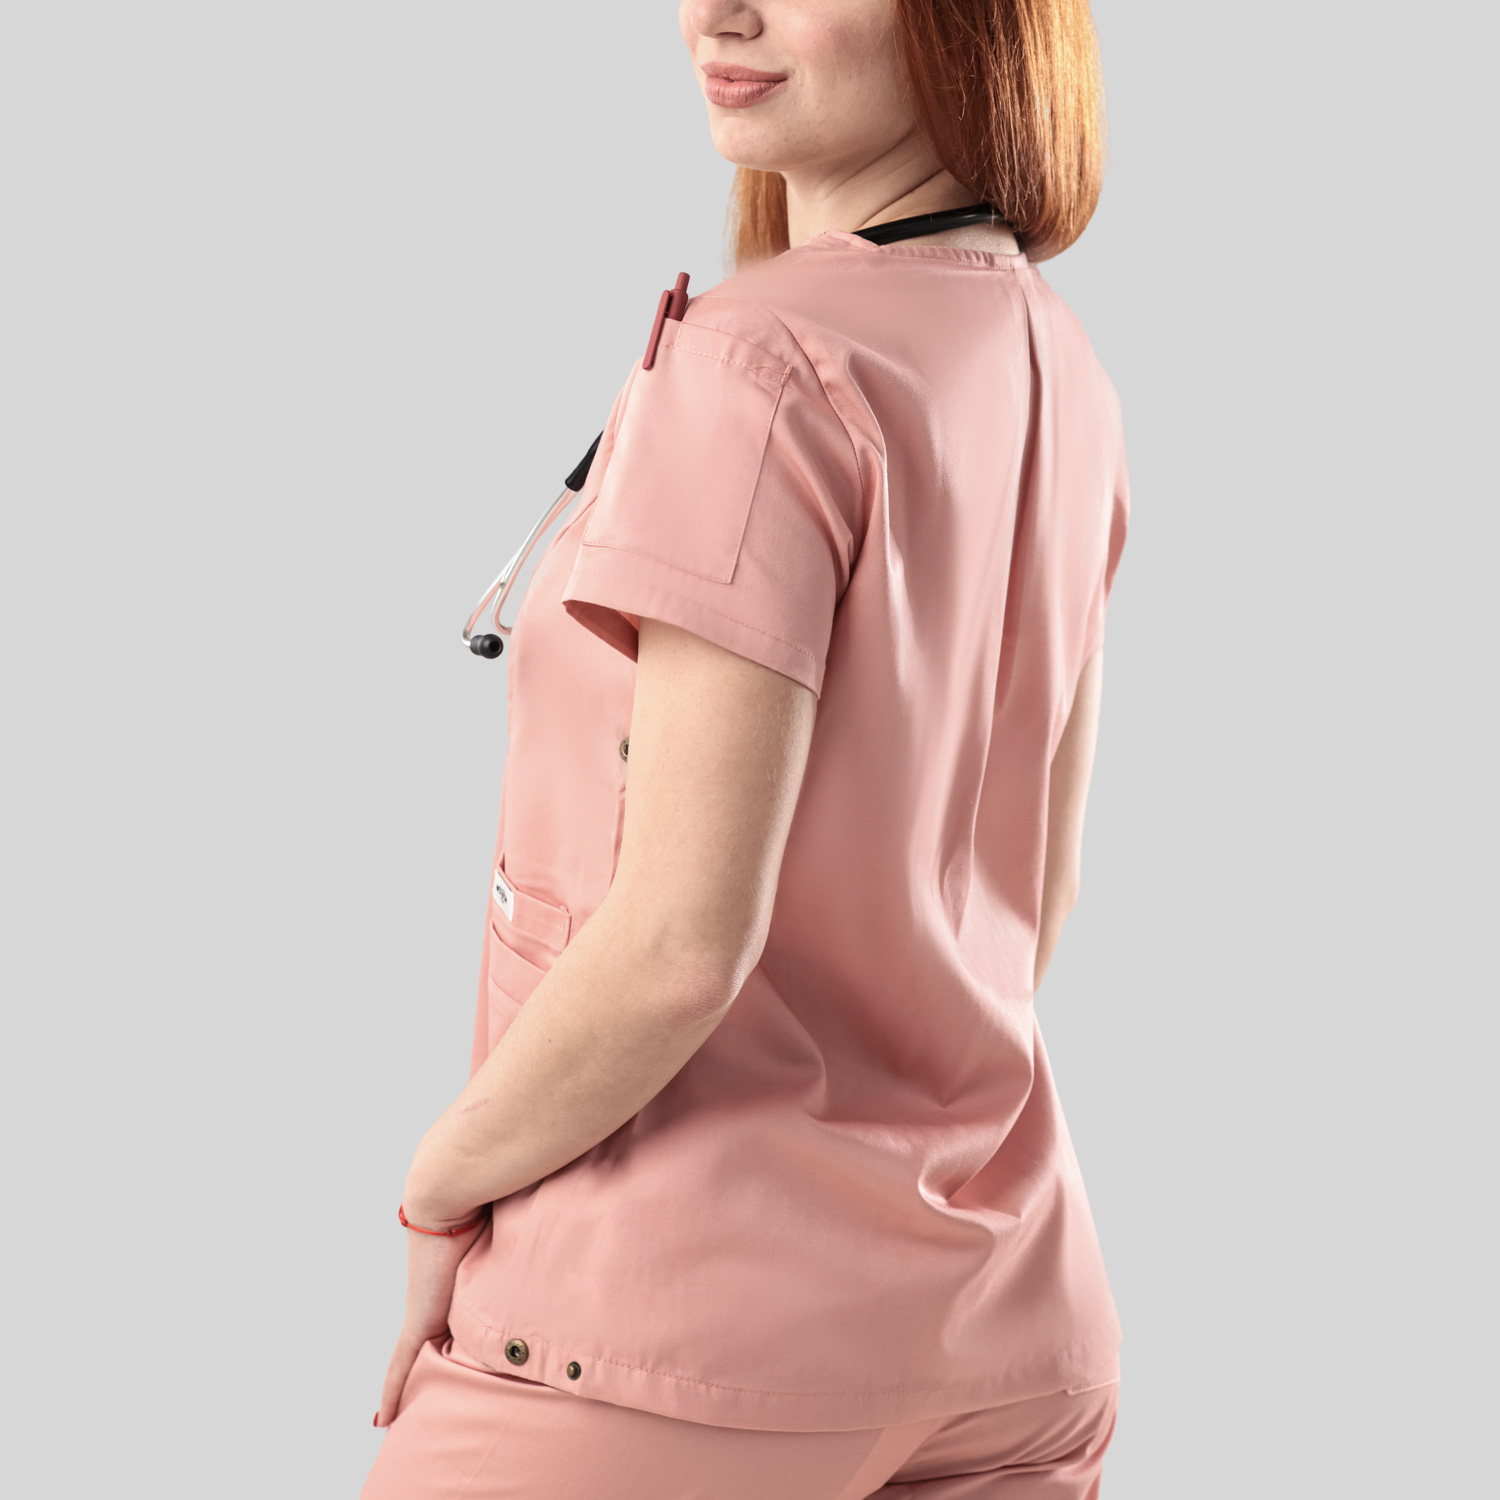 classic edition -2.0- pink blush-top- 5 pockets